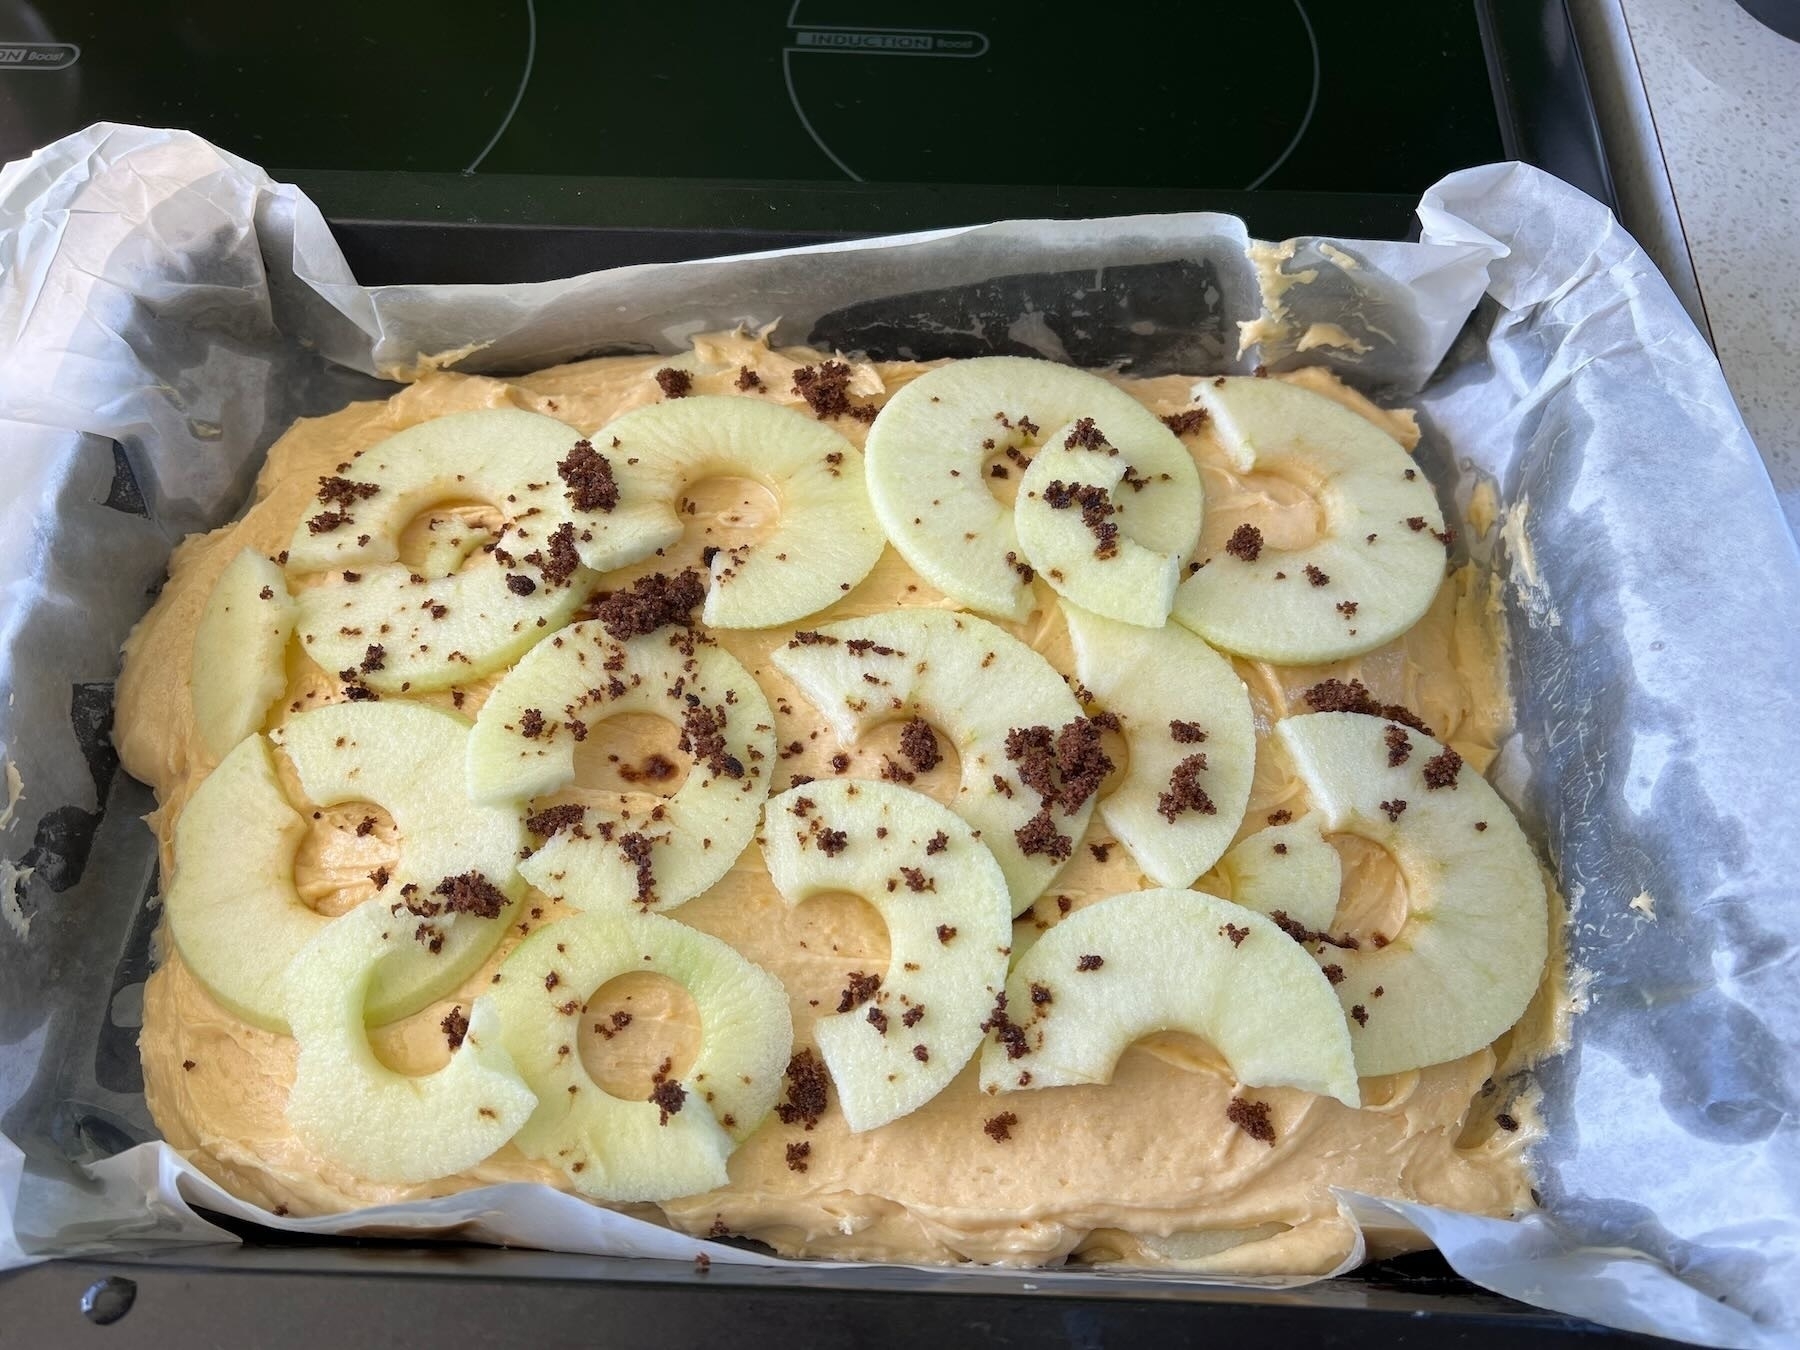 The layered apple and mix in the tray with sugar sprinkled on top. 